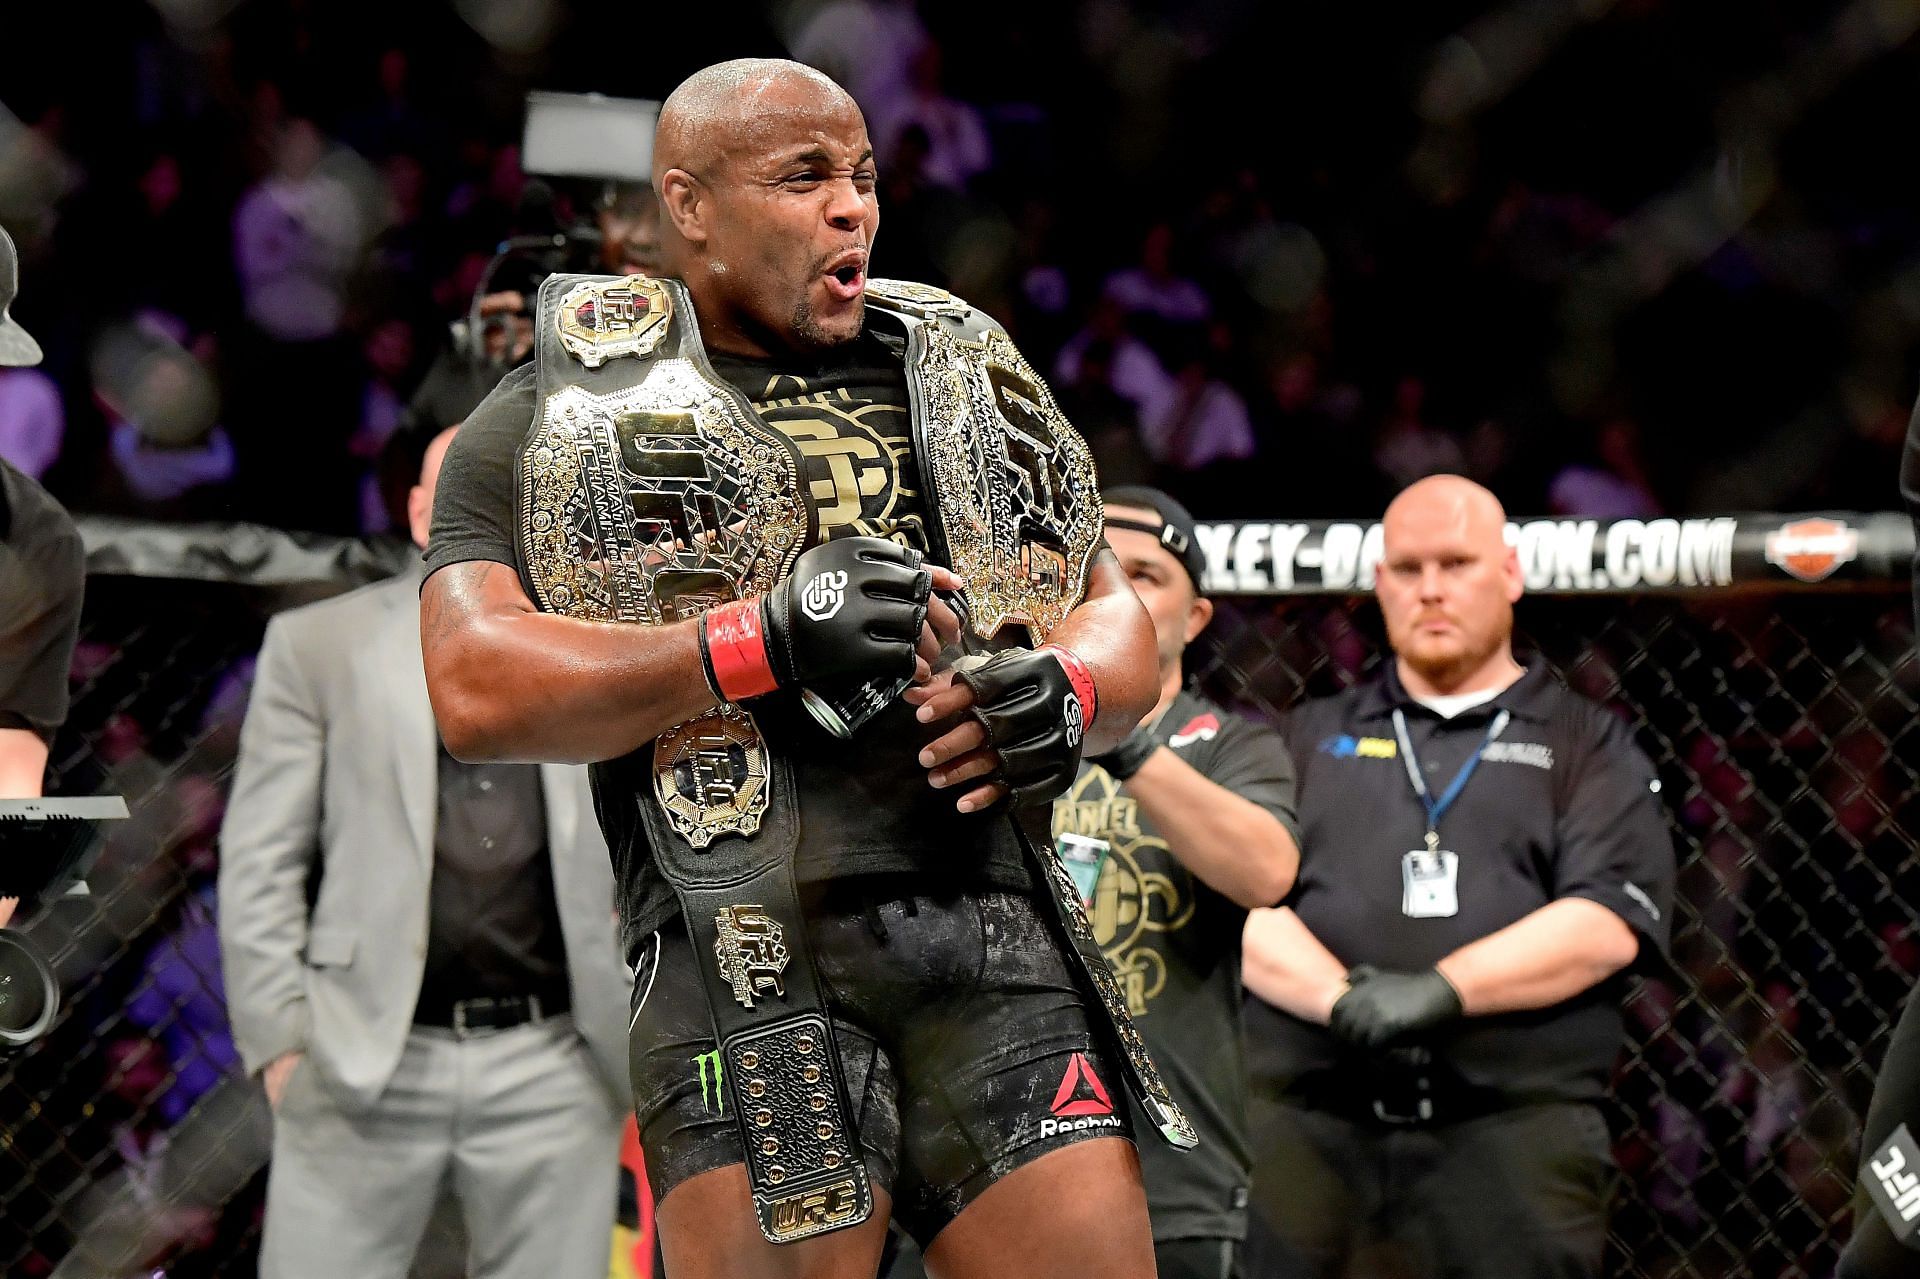 Daniel Cormier is another UFC great who held two titles